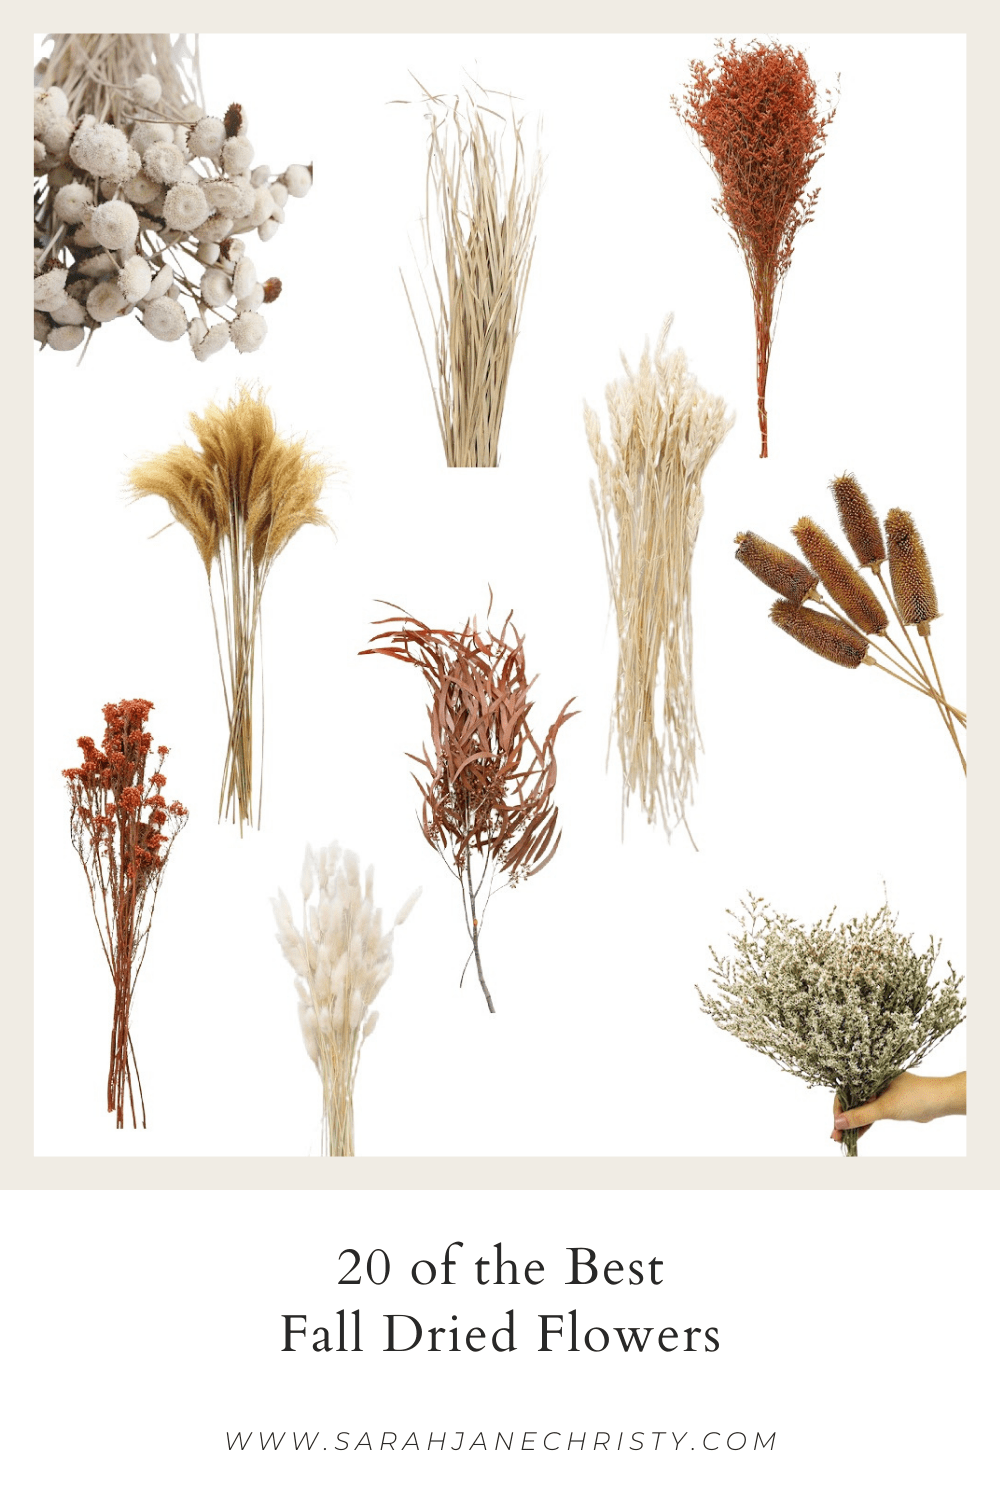 The Best Fall Dried Flowers for Decorating